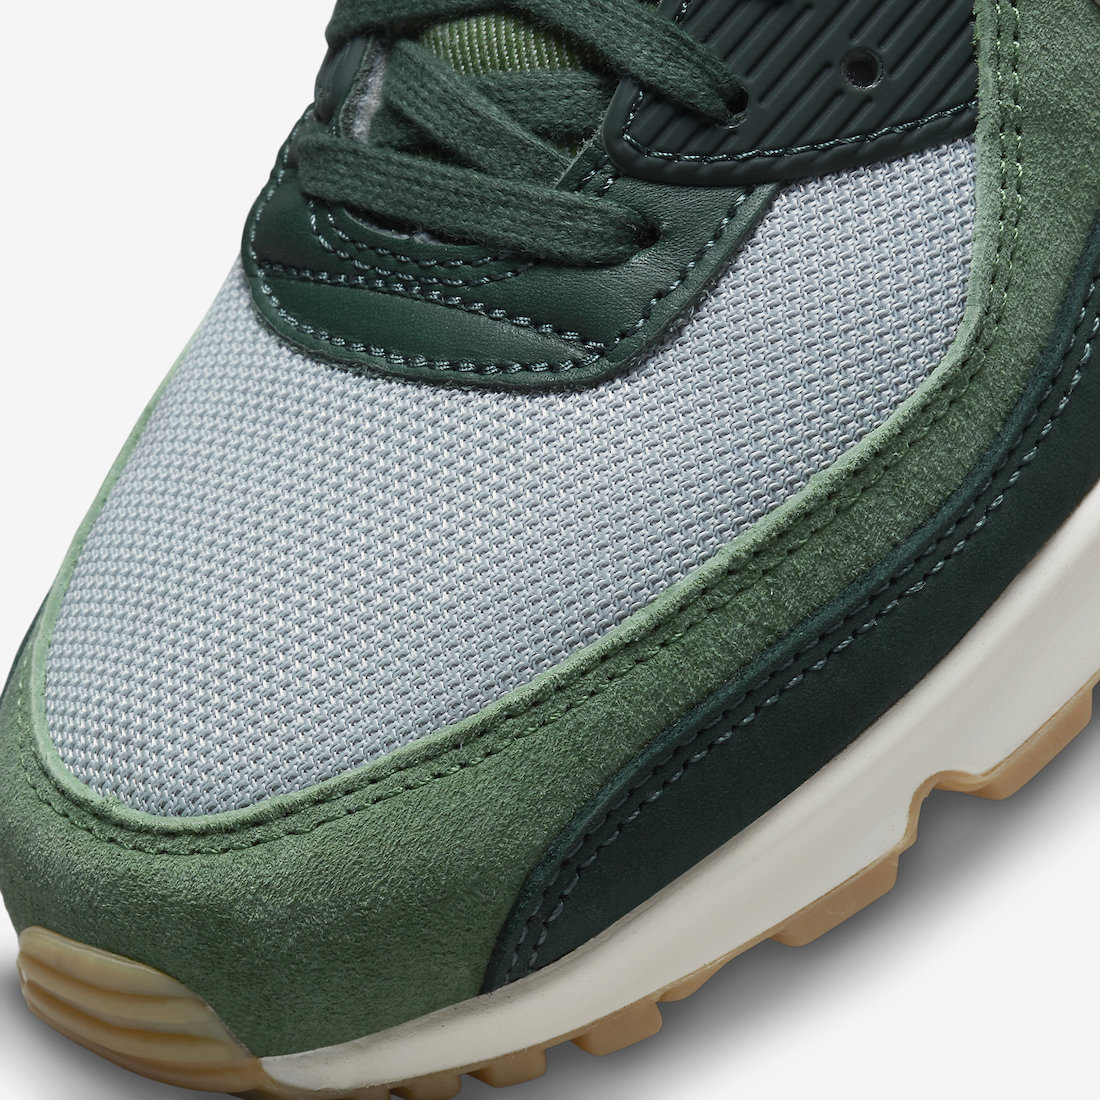 Nike-Air-Max-90-Pro-Green-DH4621-300-Release-Date-6